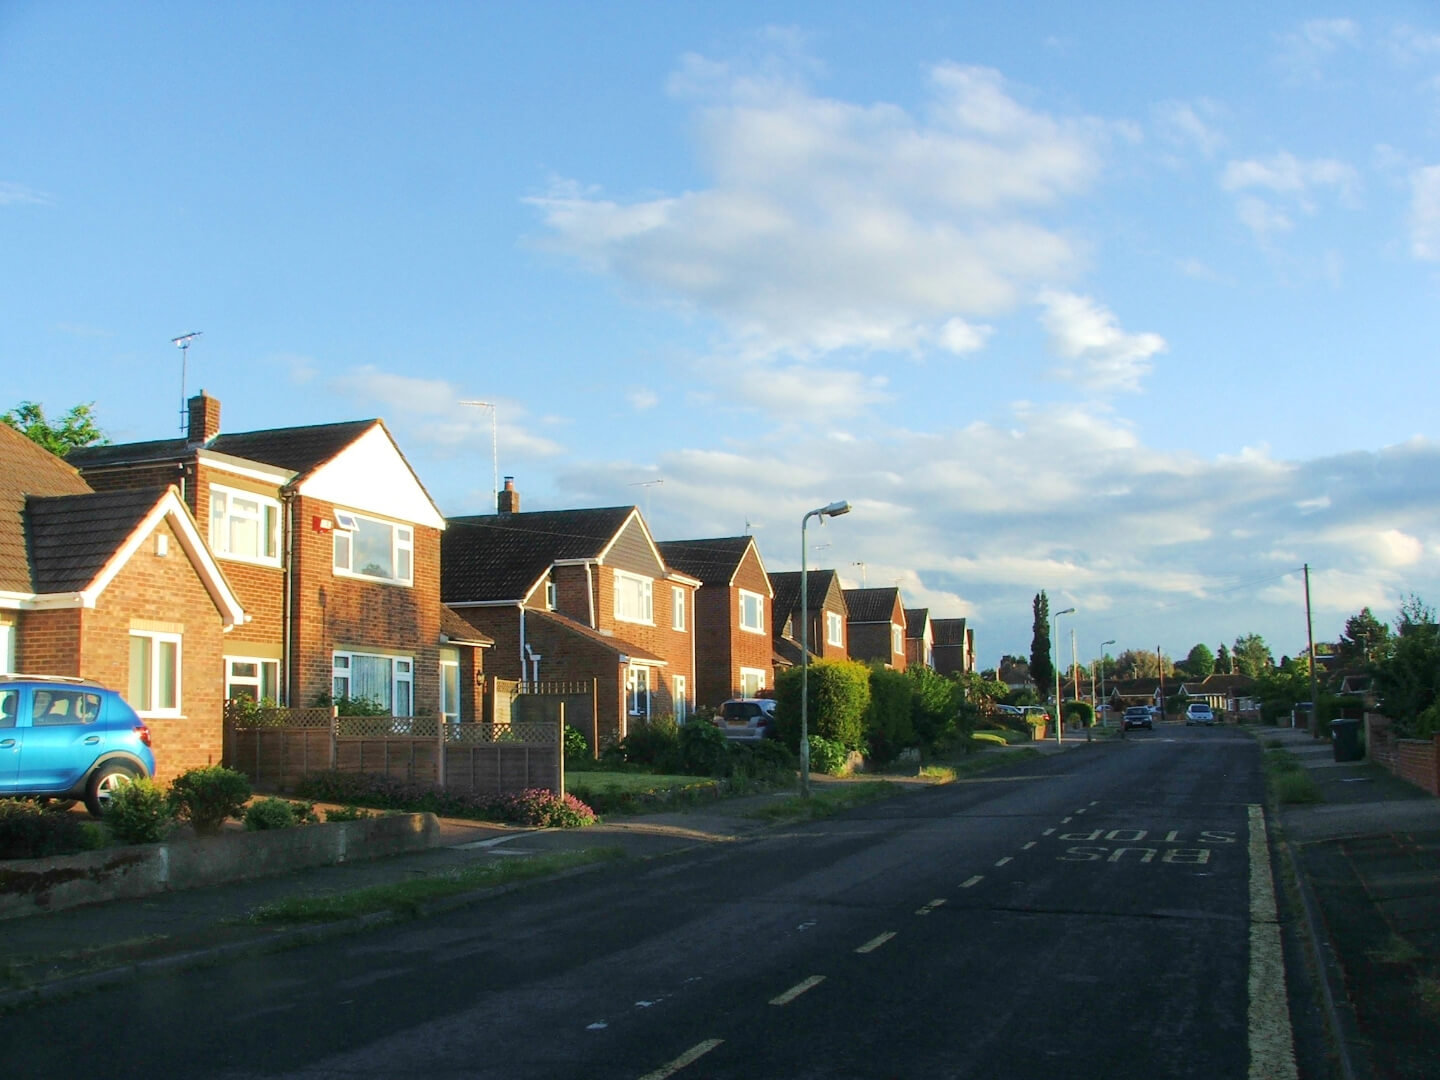 Student Accommodation in Barton, Canterbury - houses on Barton Road